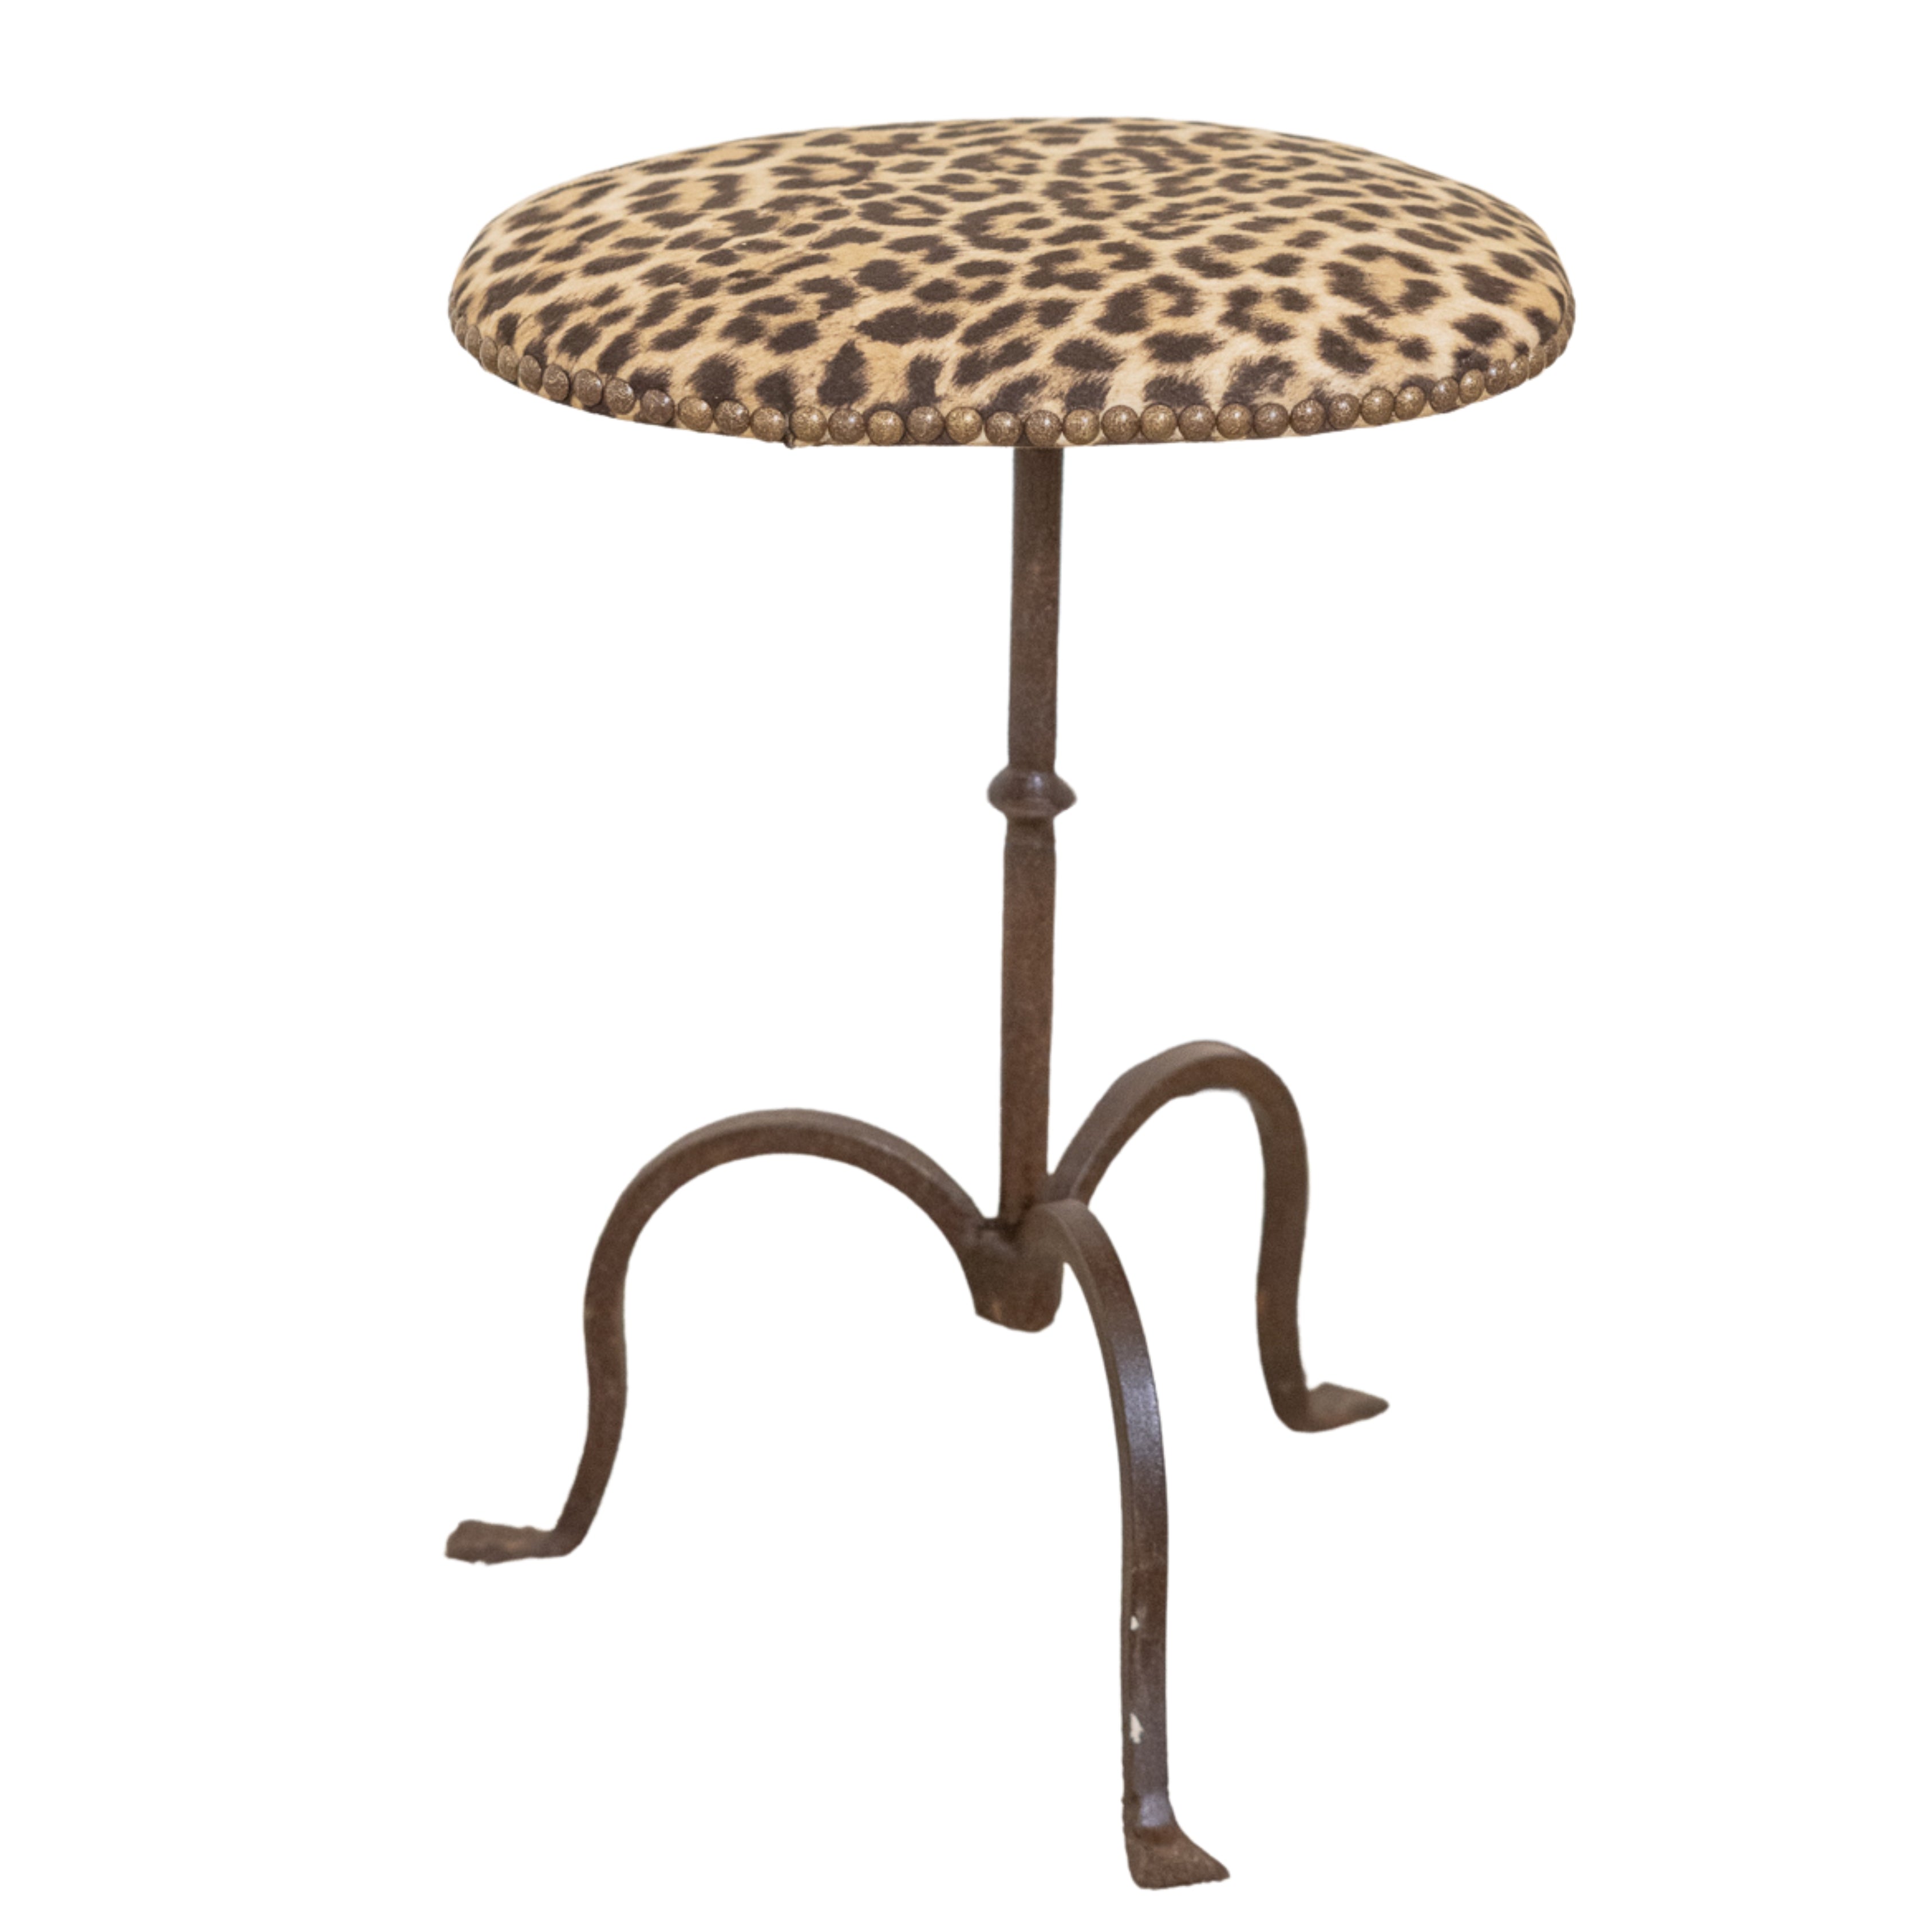 Leopard-Covered Stool